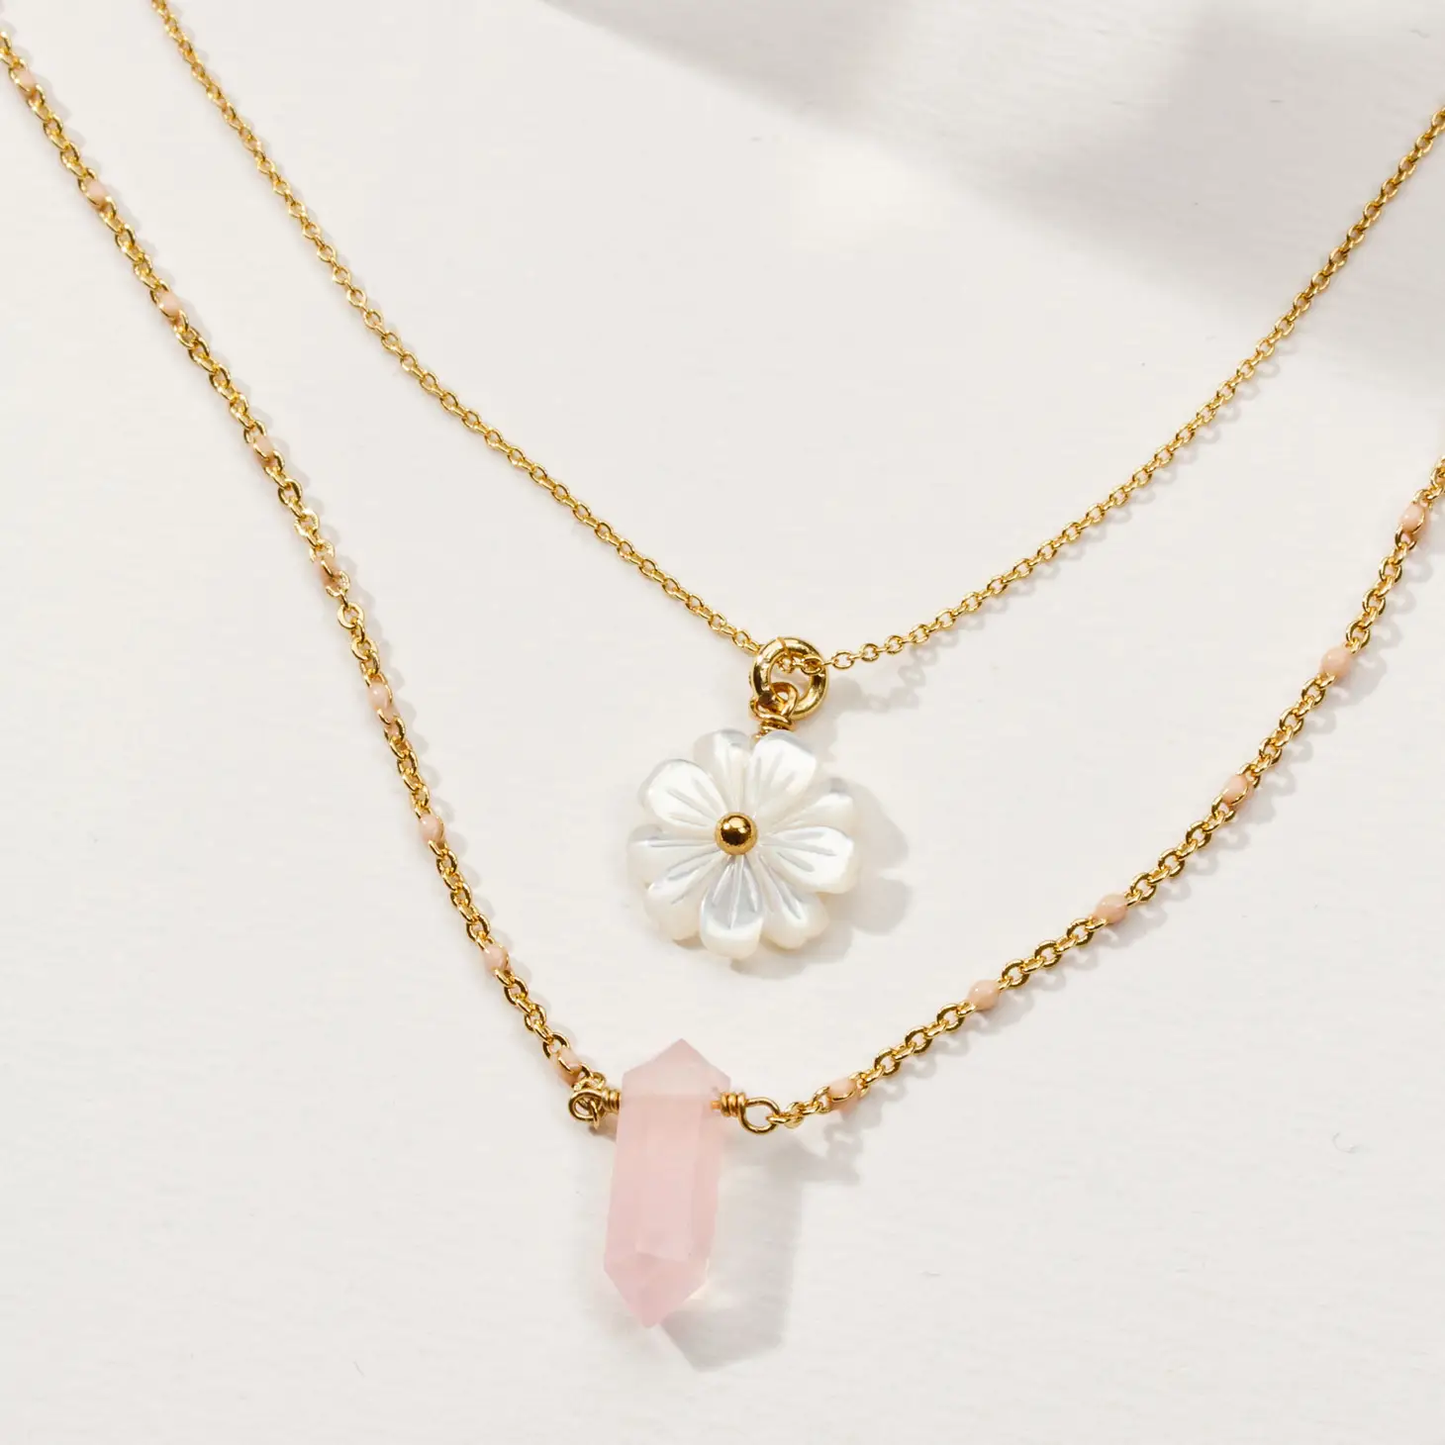 Blooming Layered Necklace Set